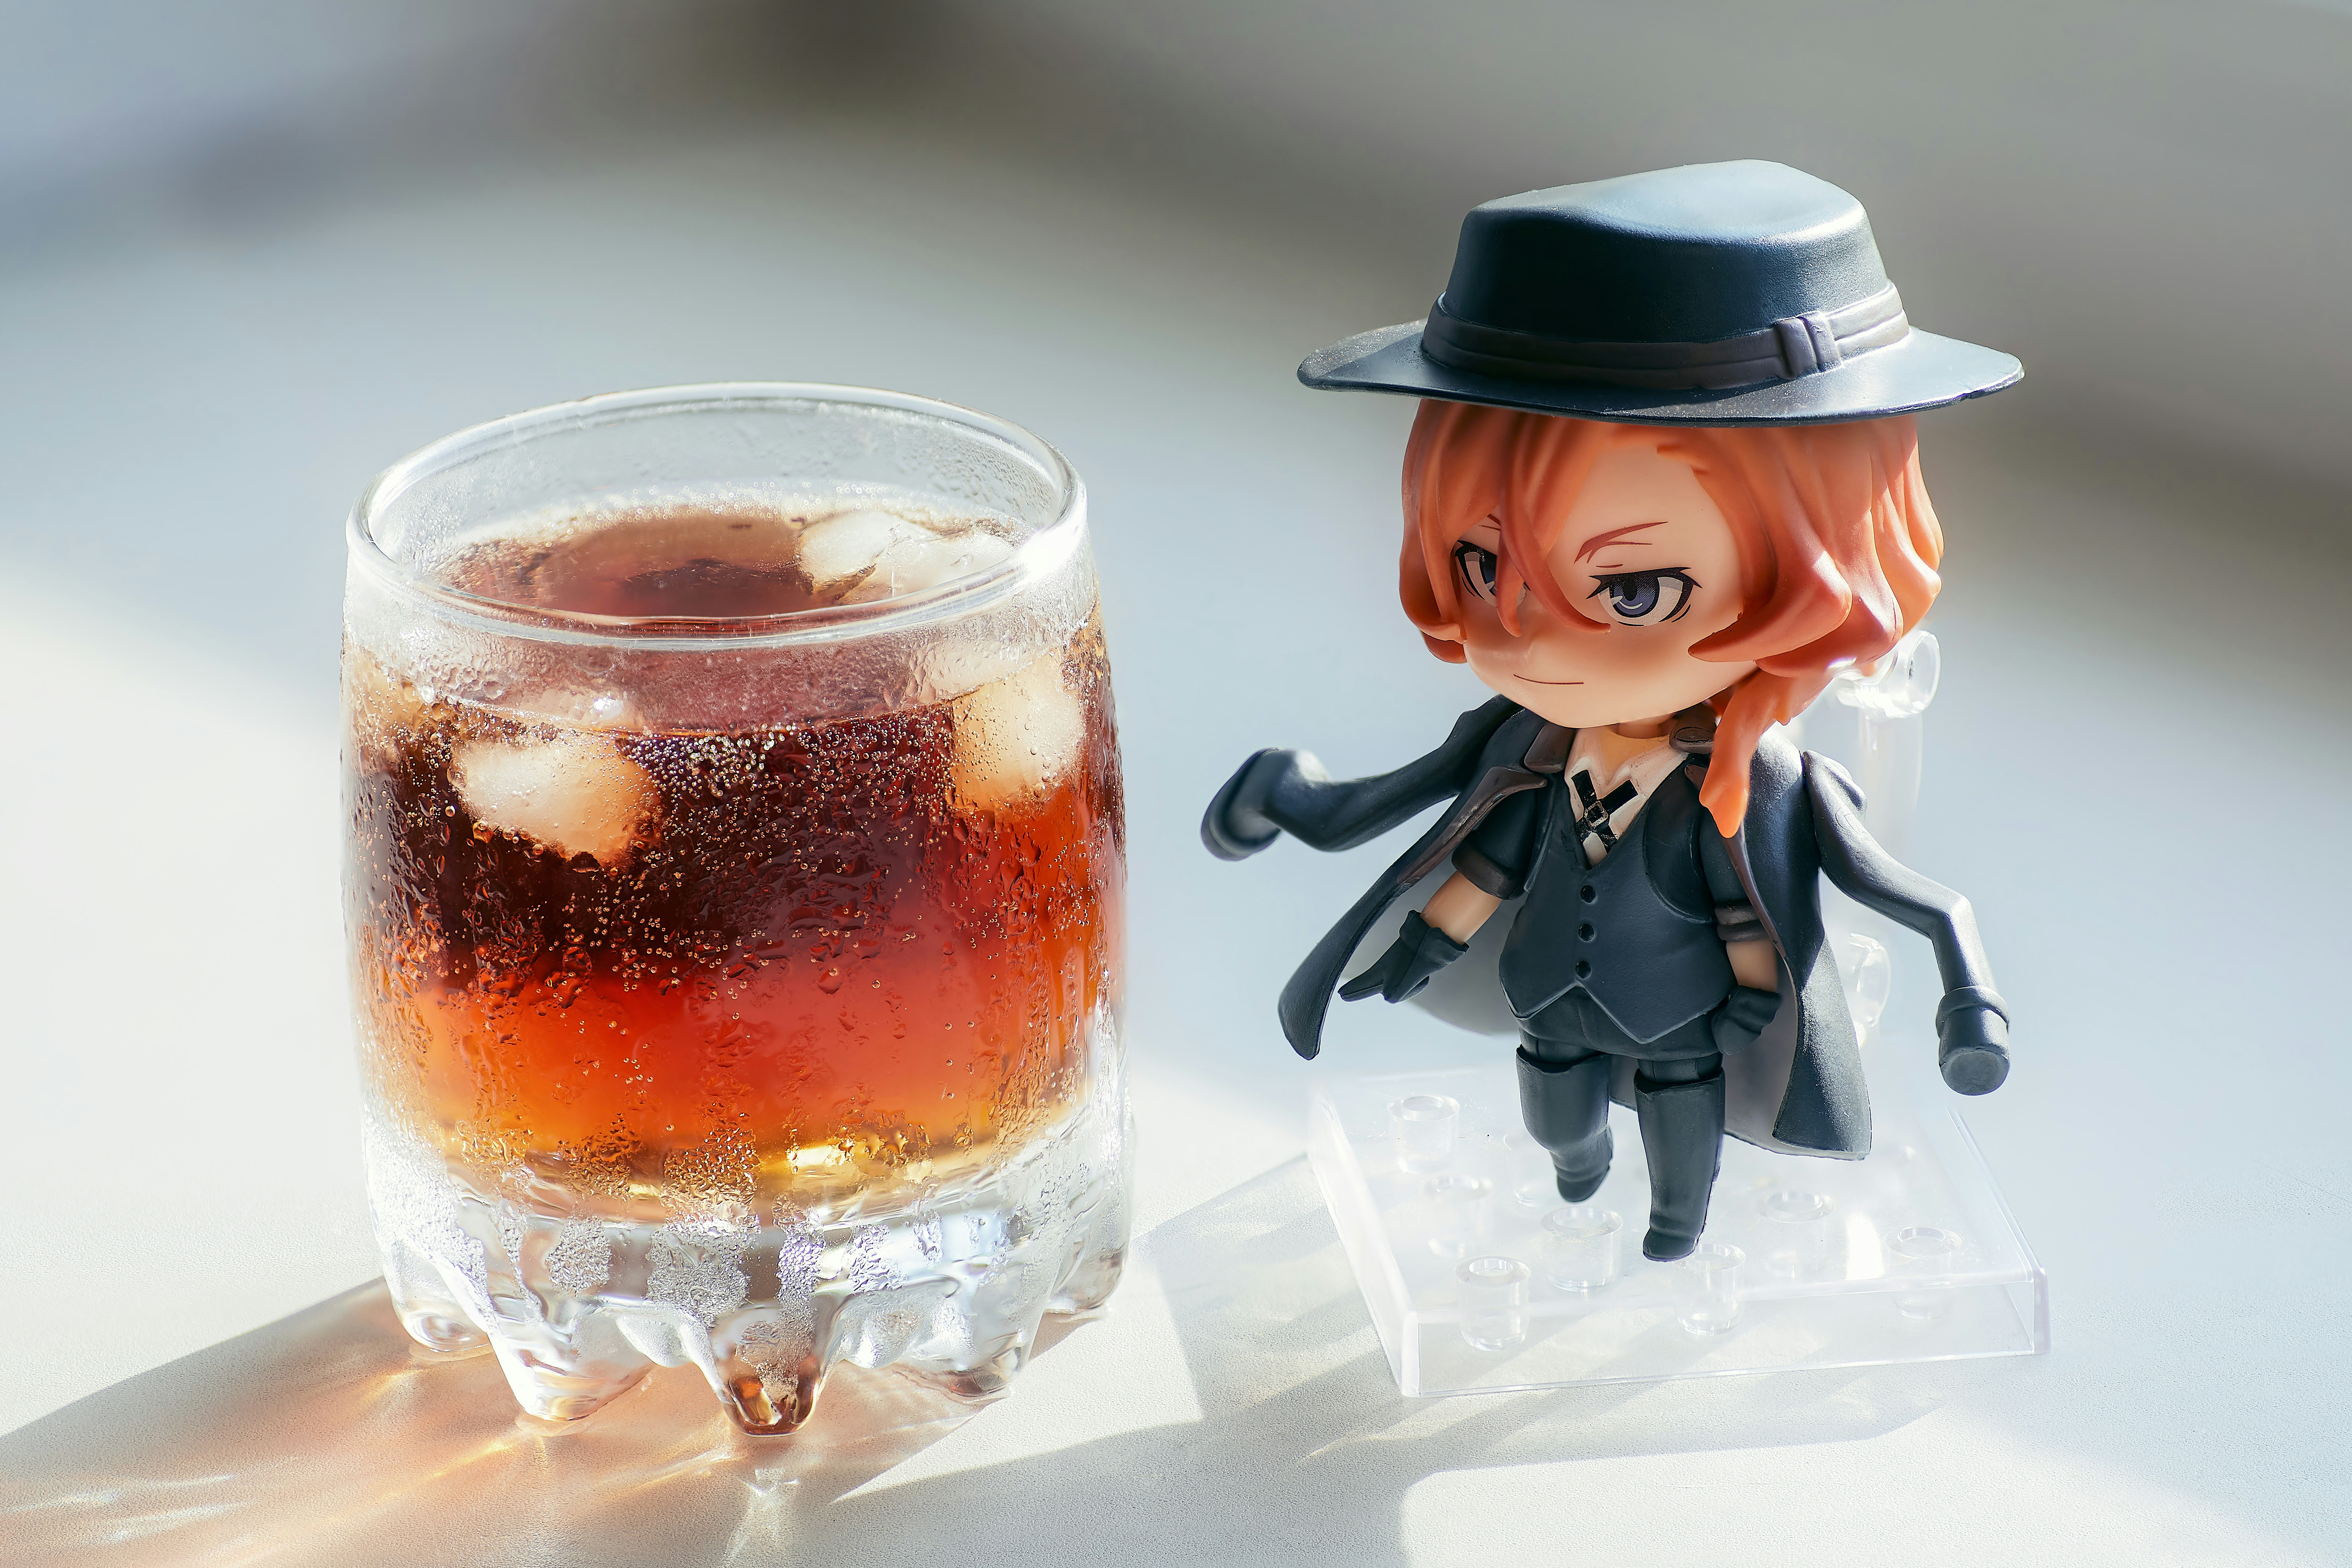 Nendoroid Chuya Nakahara - a close-up figure with a glass of whiskey and ice on a blurred background. Beautiful picture for your desktop and design with an anime character.